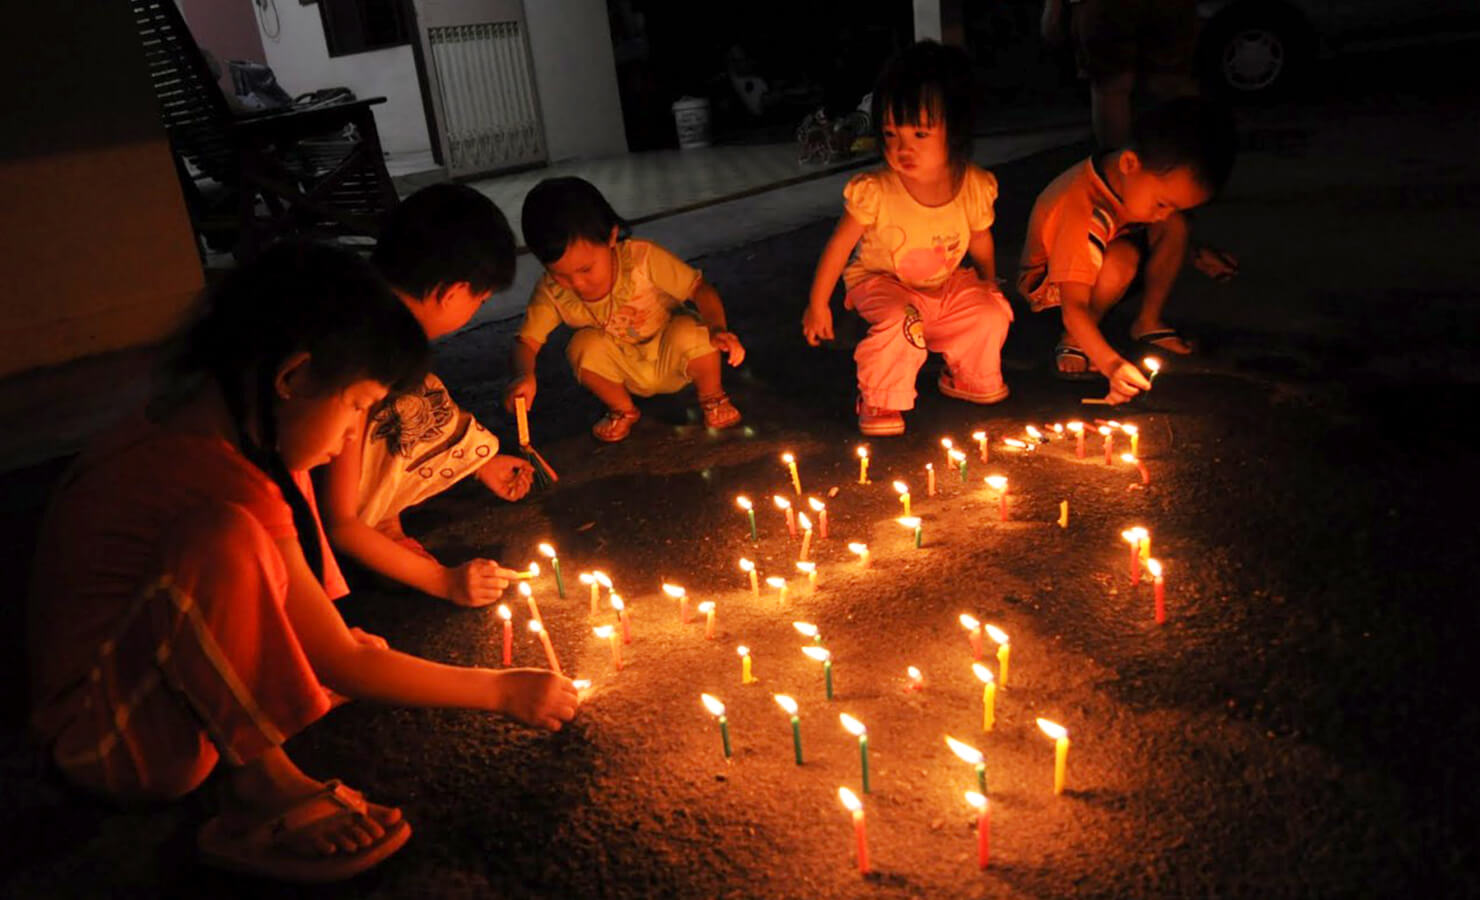 bloomthis-mid-autumn-festival-activities-guide-2021-07-kids-playing-candles